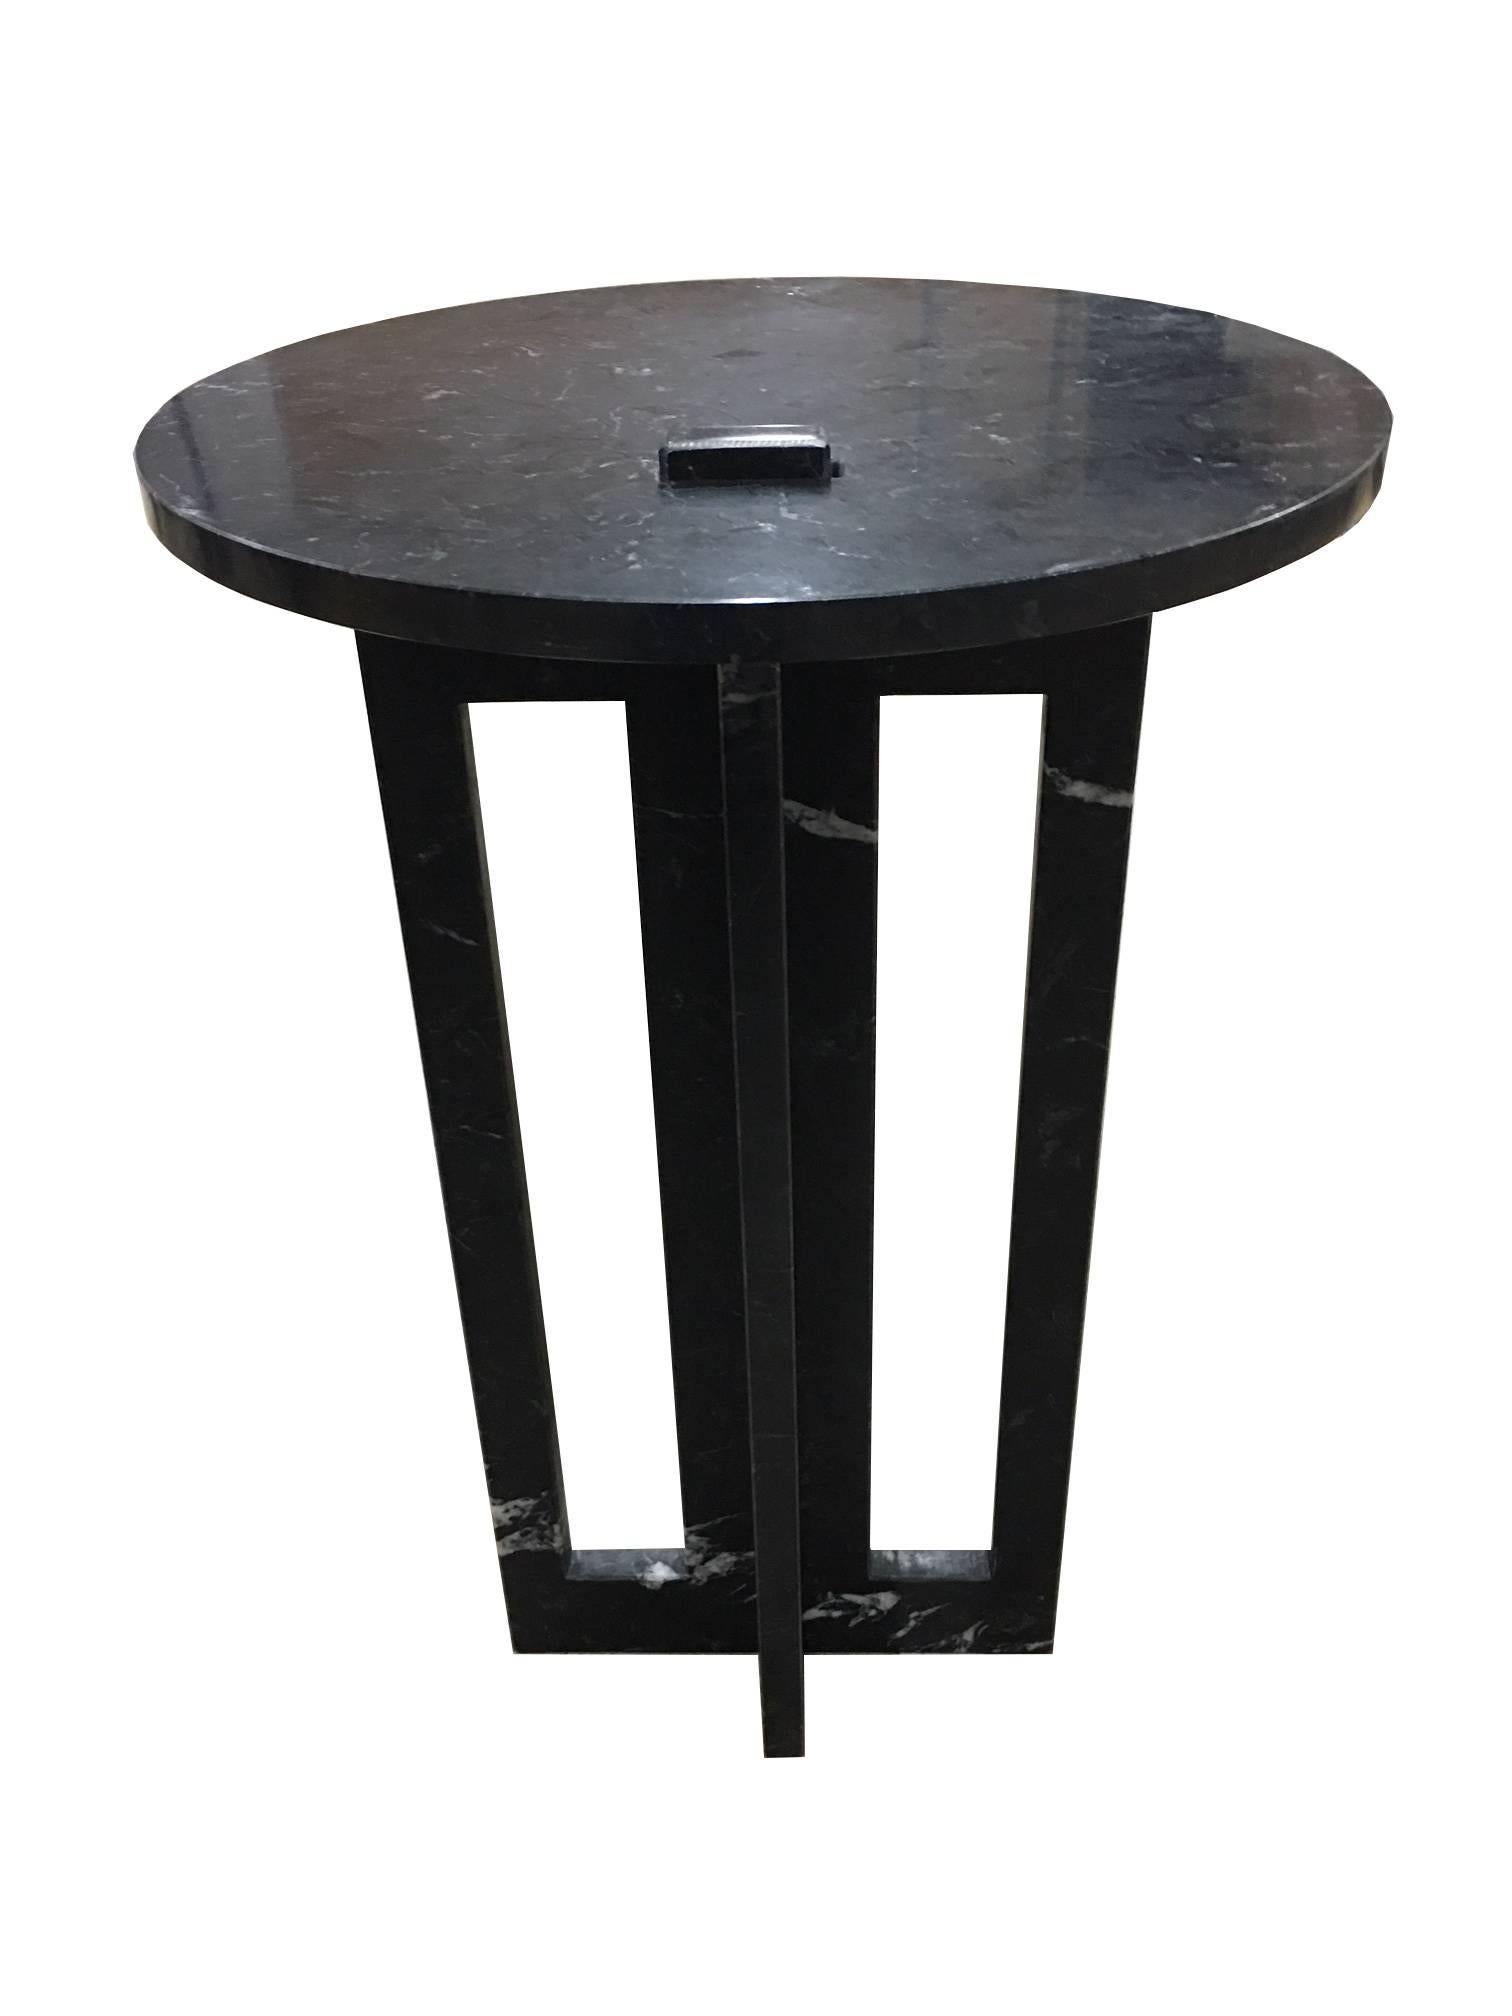 Pair of Italian Modern Black Marble Side Tables by Massimo Mangiardi In Excellent Condition For Sale In New York, NY